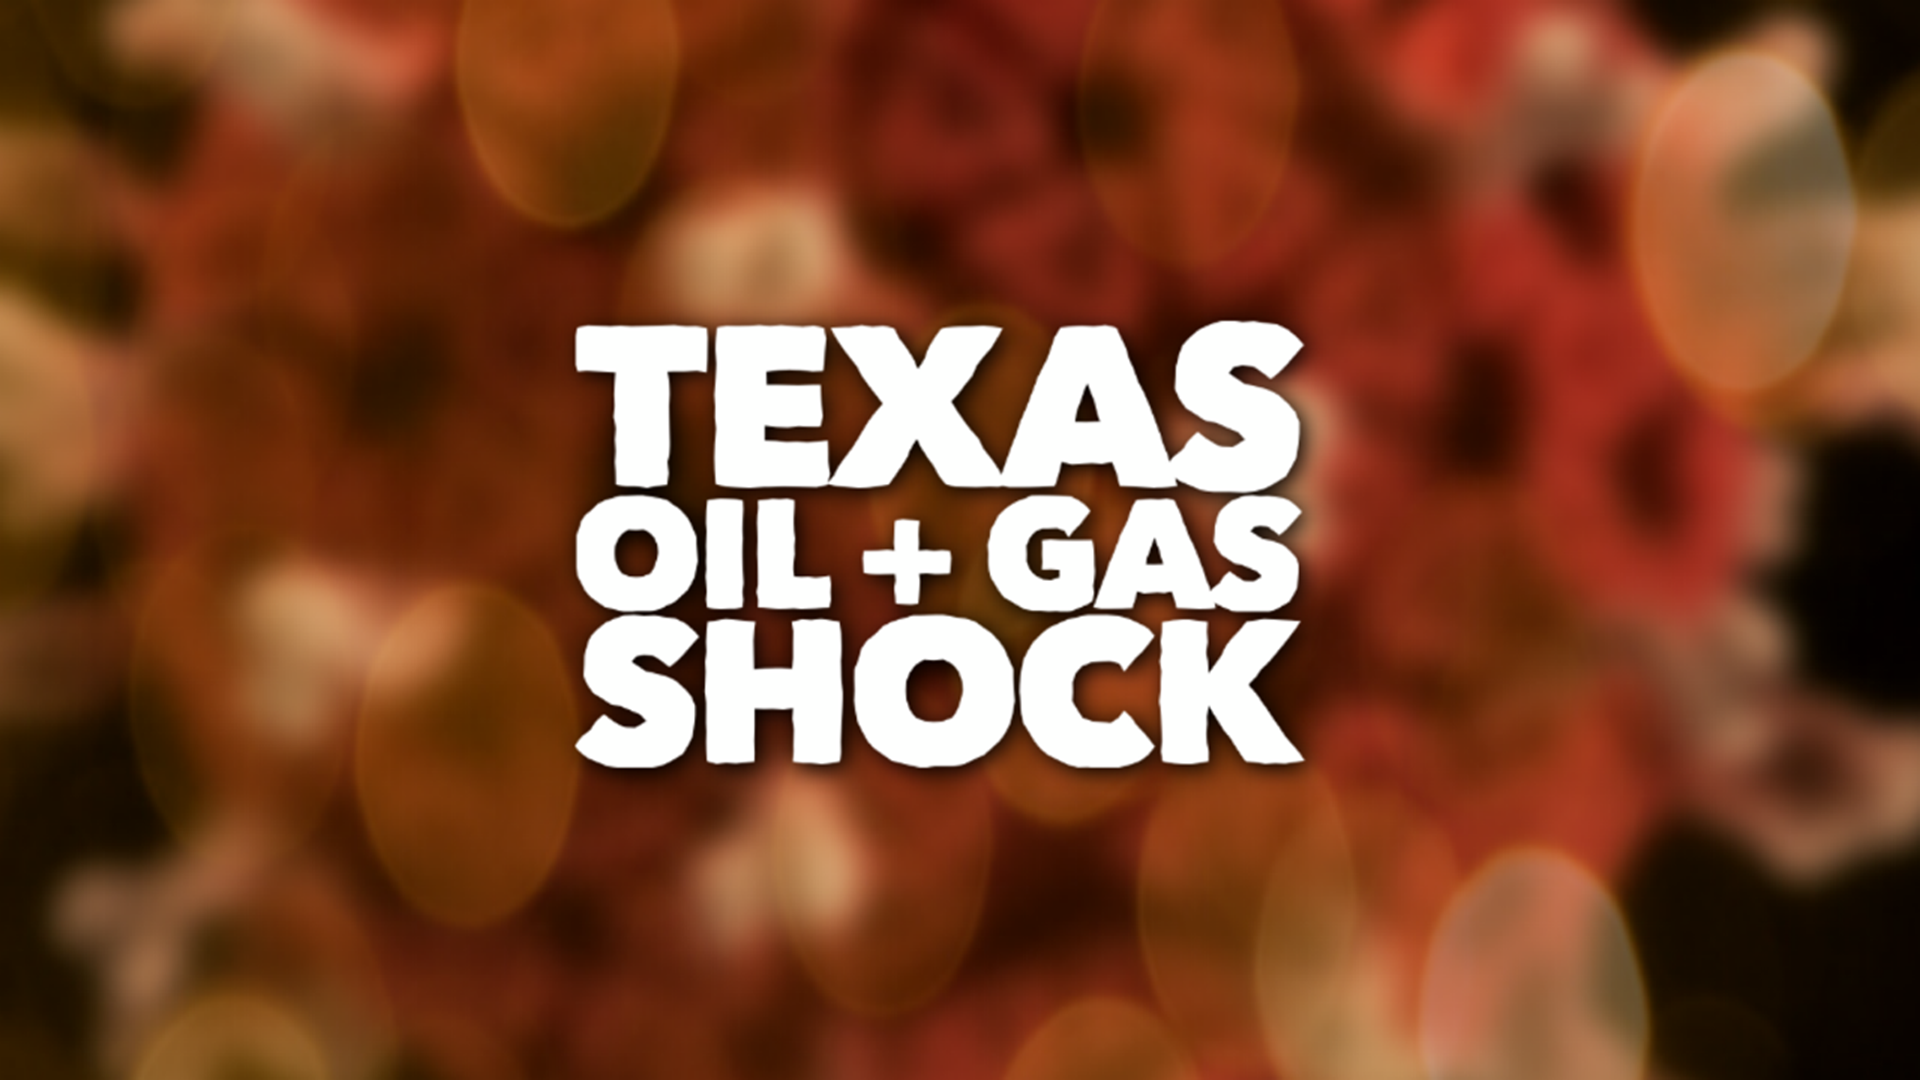 State regulators held a marathon session on Tuesday, taking testimony on whether Texas should force a 20% cut in production as demand for oil dries up.